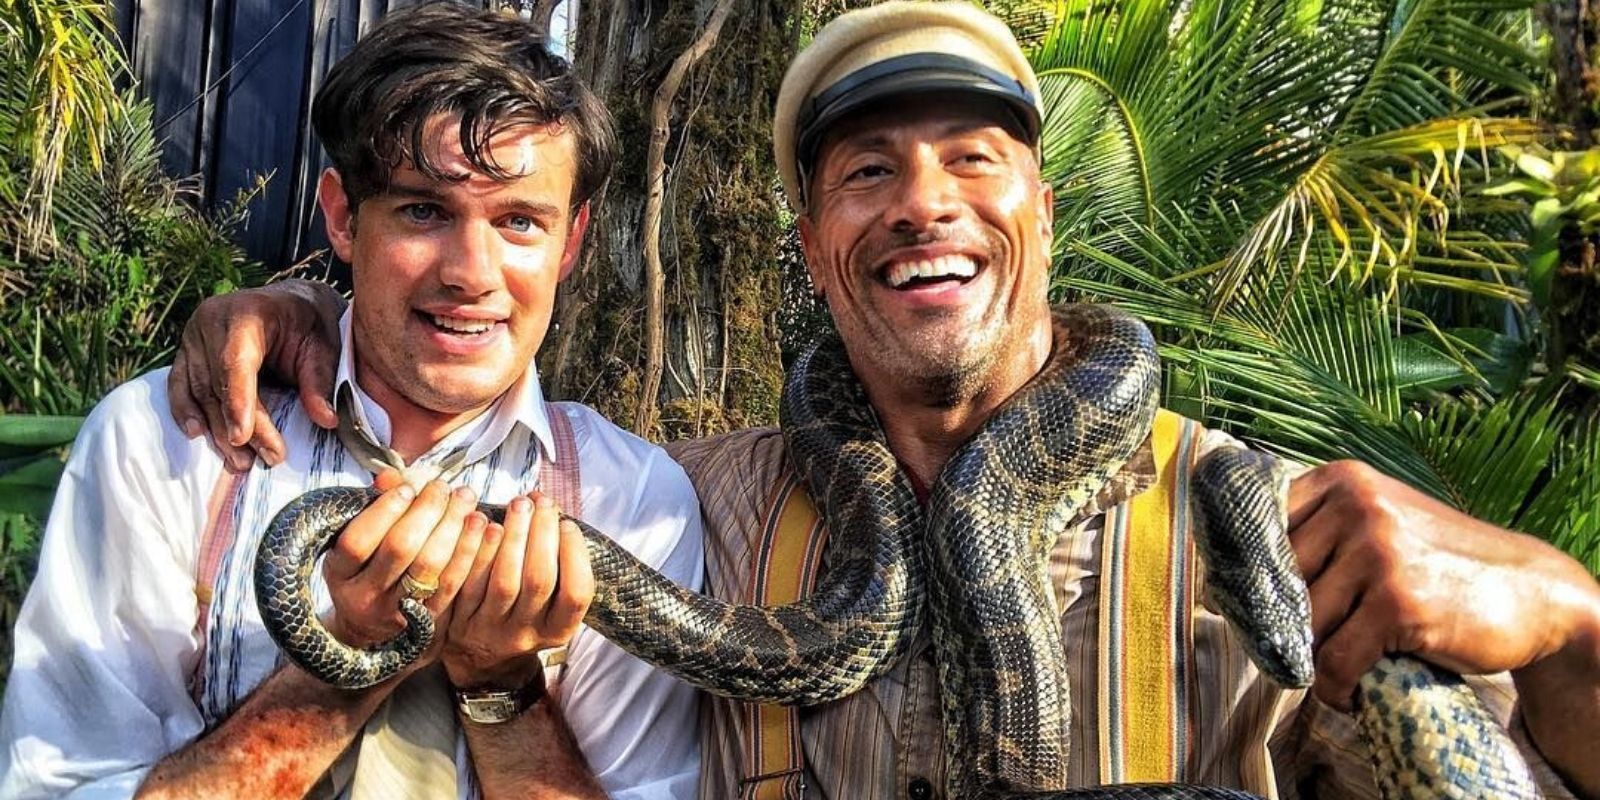 Jack Whitehall and Dwayne Johnson in a behind the scenes photo from Disney's Jungle Cruise